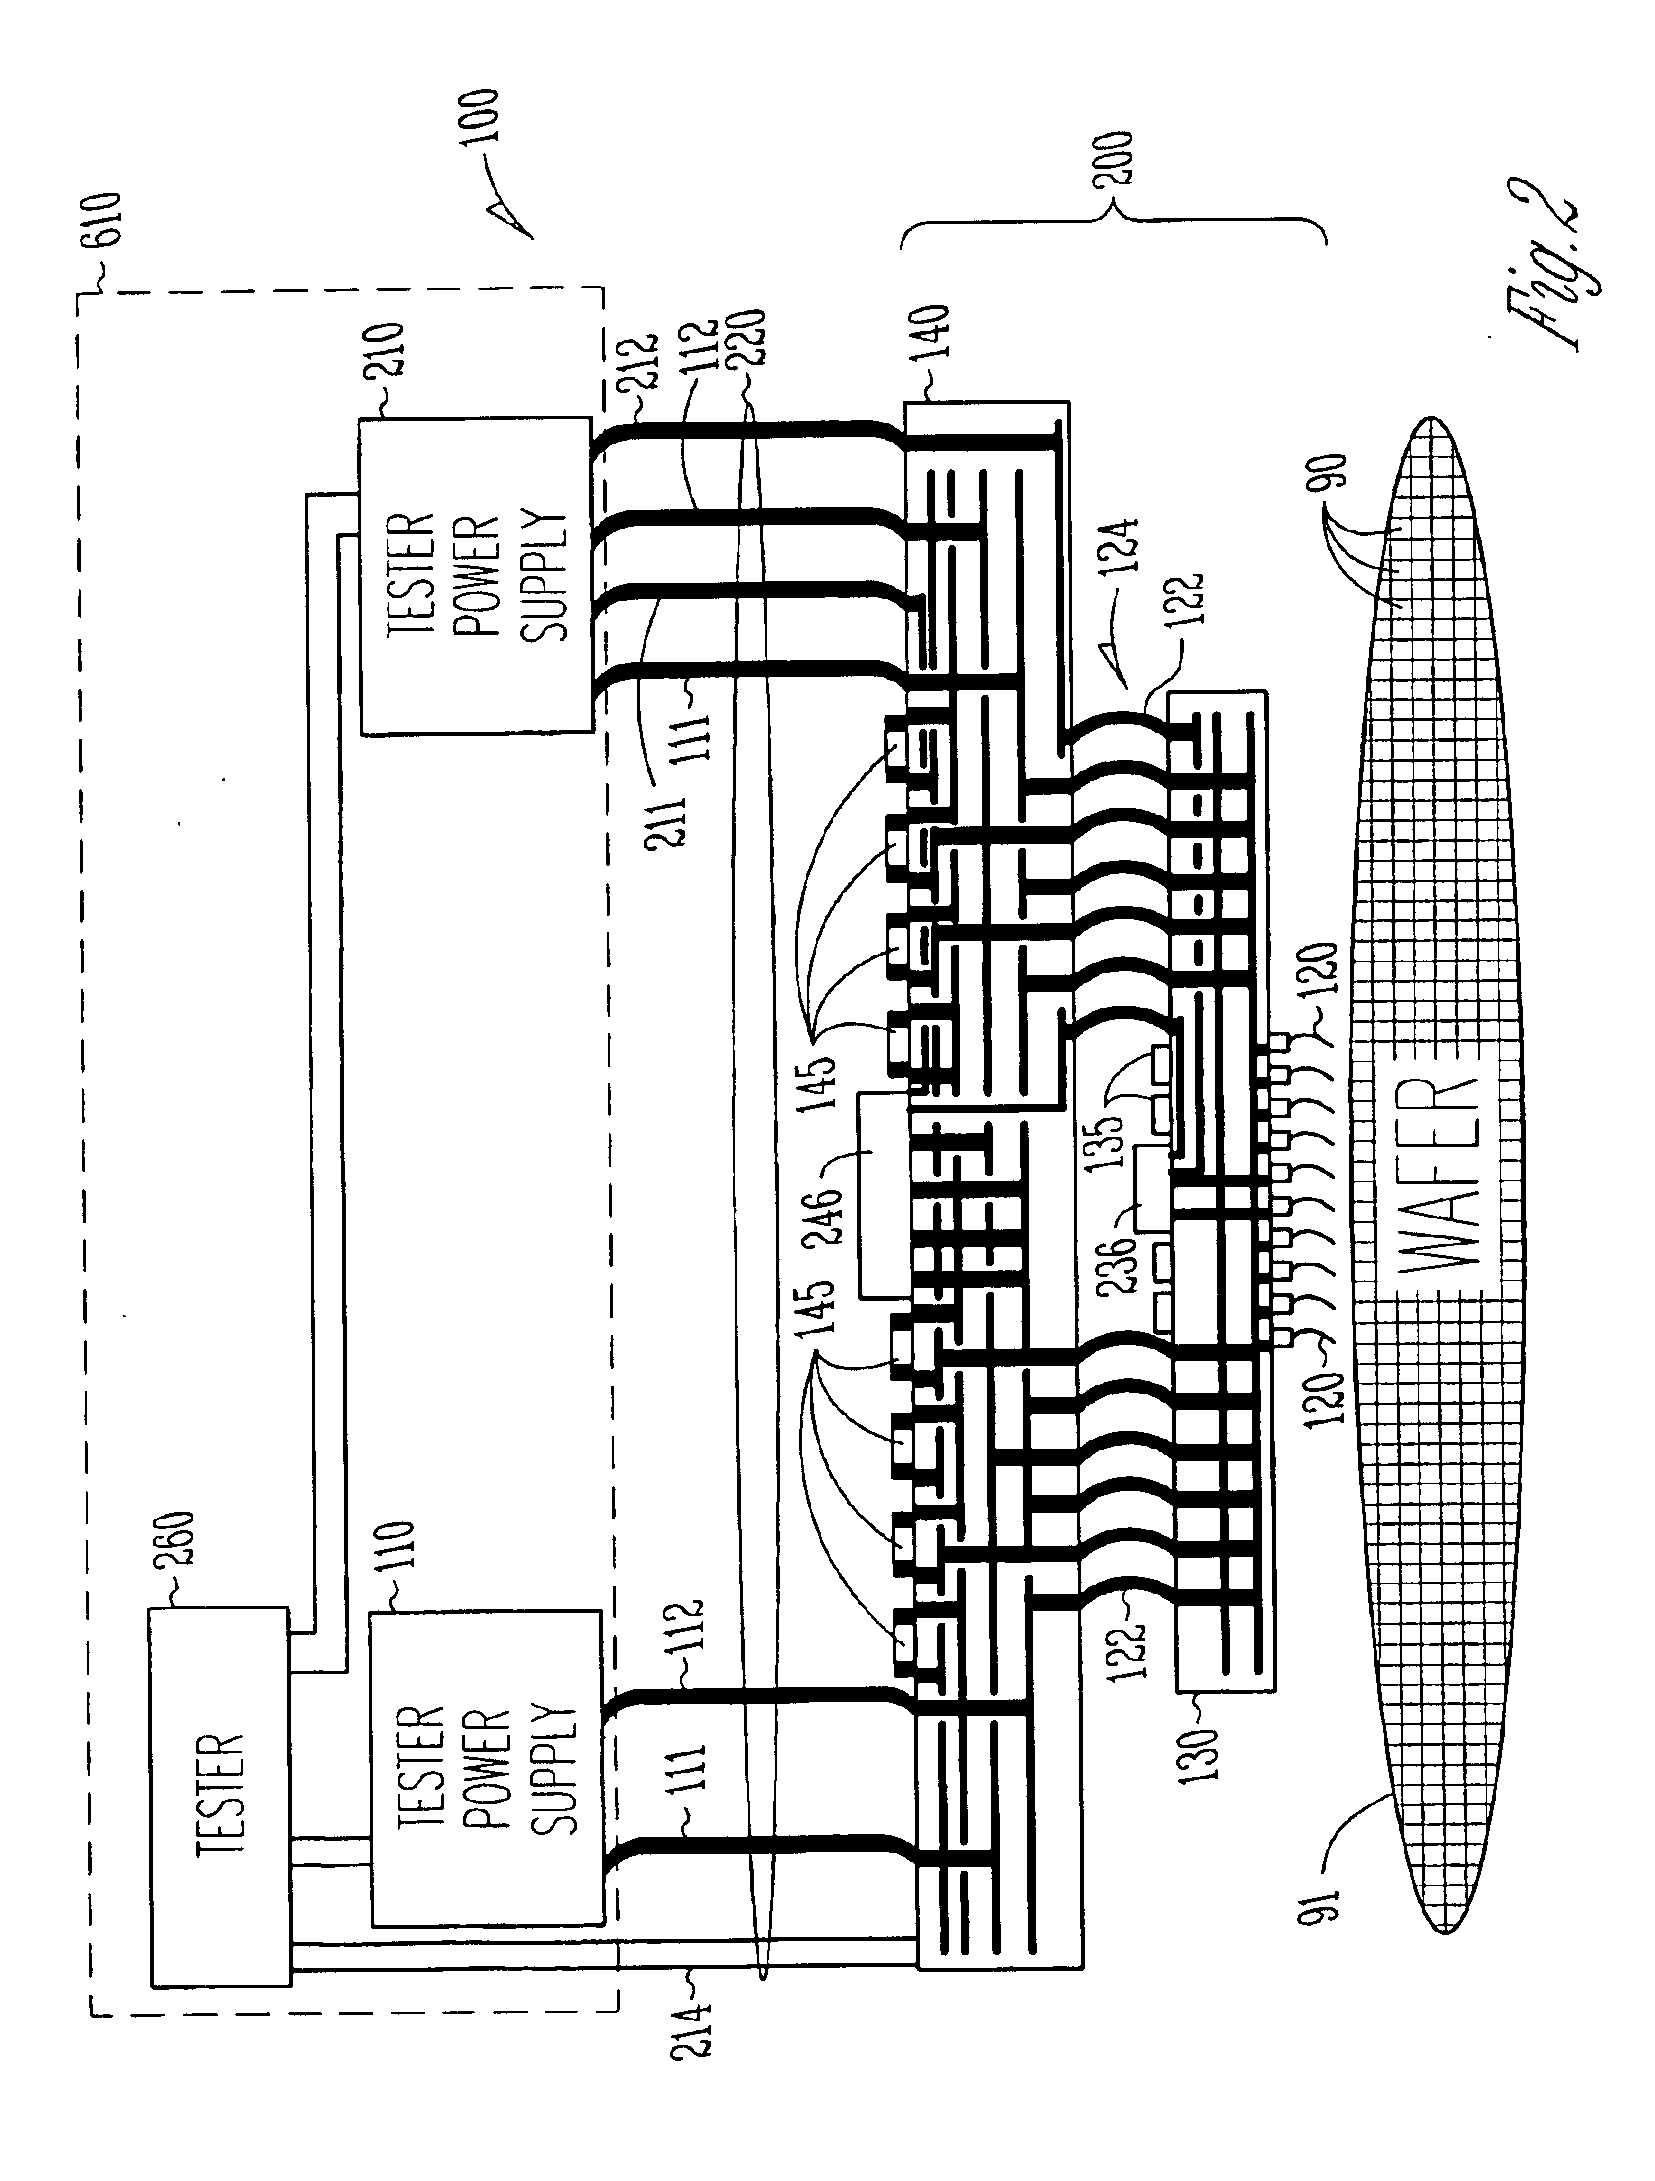 Embedded voltage regulator and active transient control device in probe head for improved power delivery and method